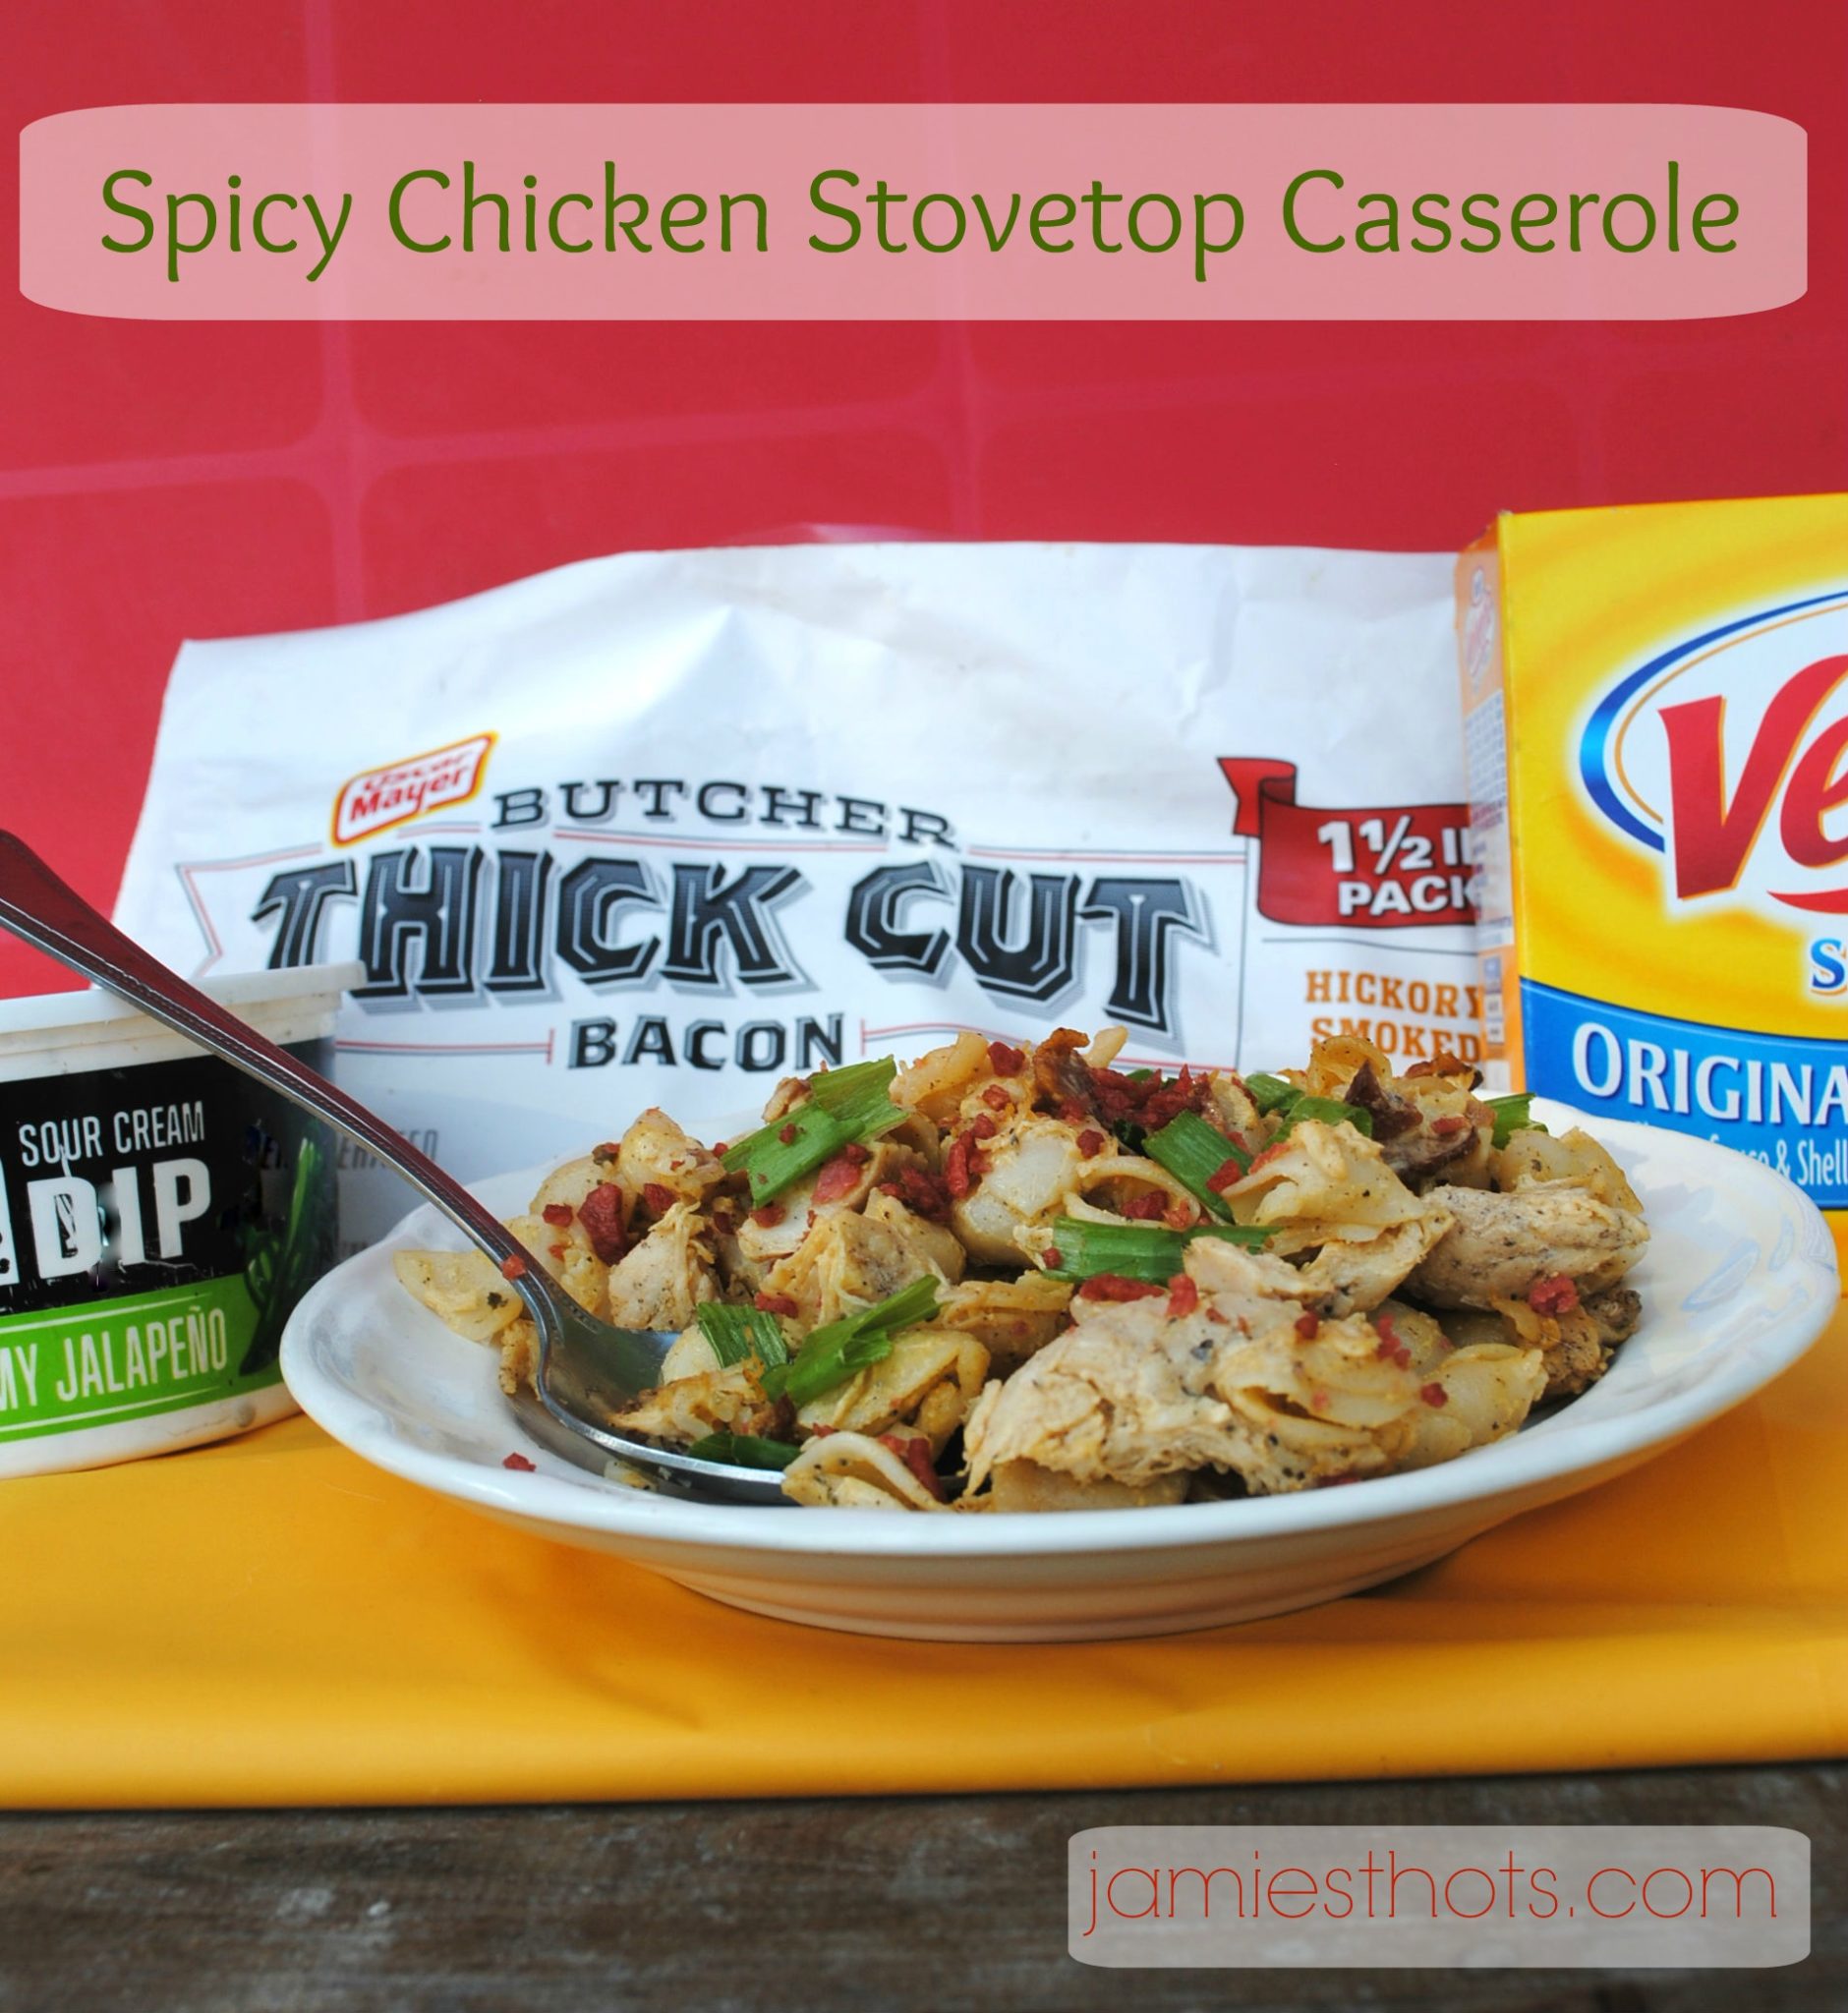 Spicy Chicken Stovetop Casserole has jalapeno sour cream dip, bacon, green onion, chicken, and shells & cheese. This same recipe can be revised to make a tasty breakfast (exchange the chicken for eggs) #shop